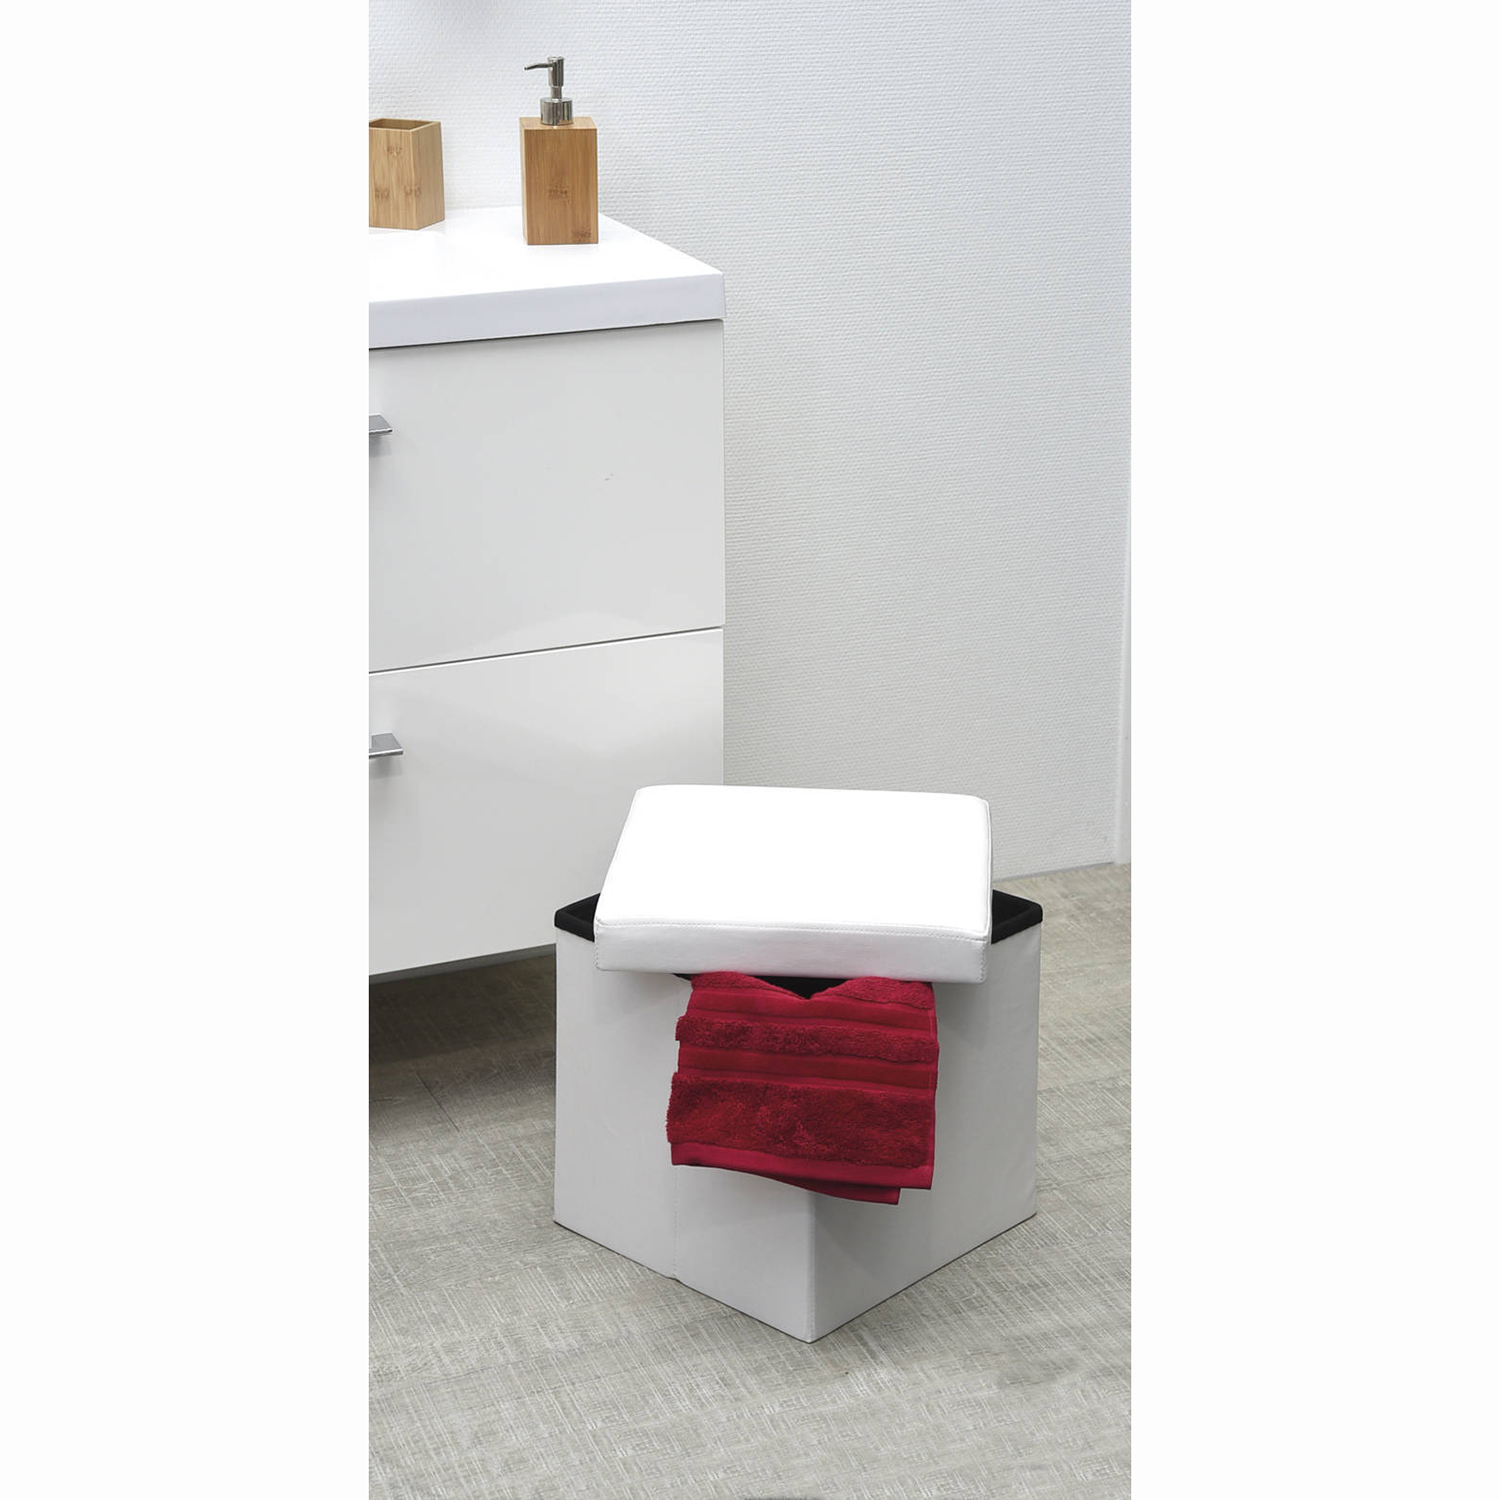 EVIDECO 2 in 1 Foldable Pouf and Storage Box - LEATHER look Cube Faux Leather Folding Storage Ottoman White